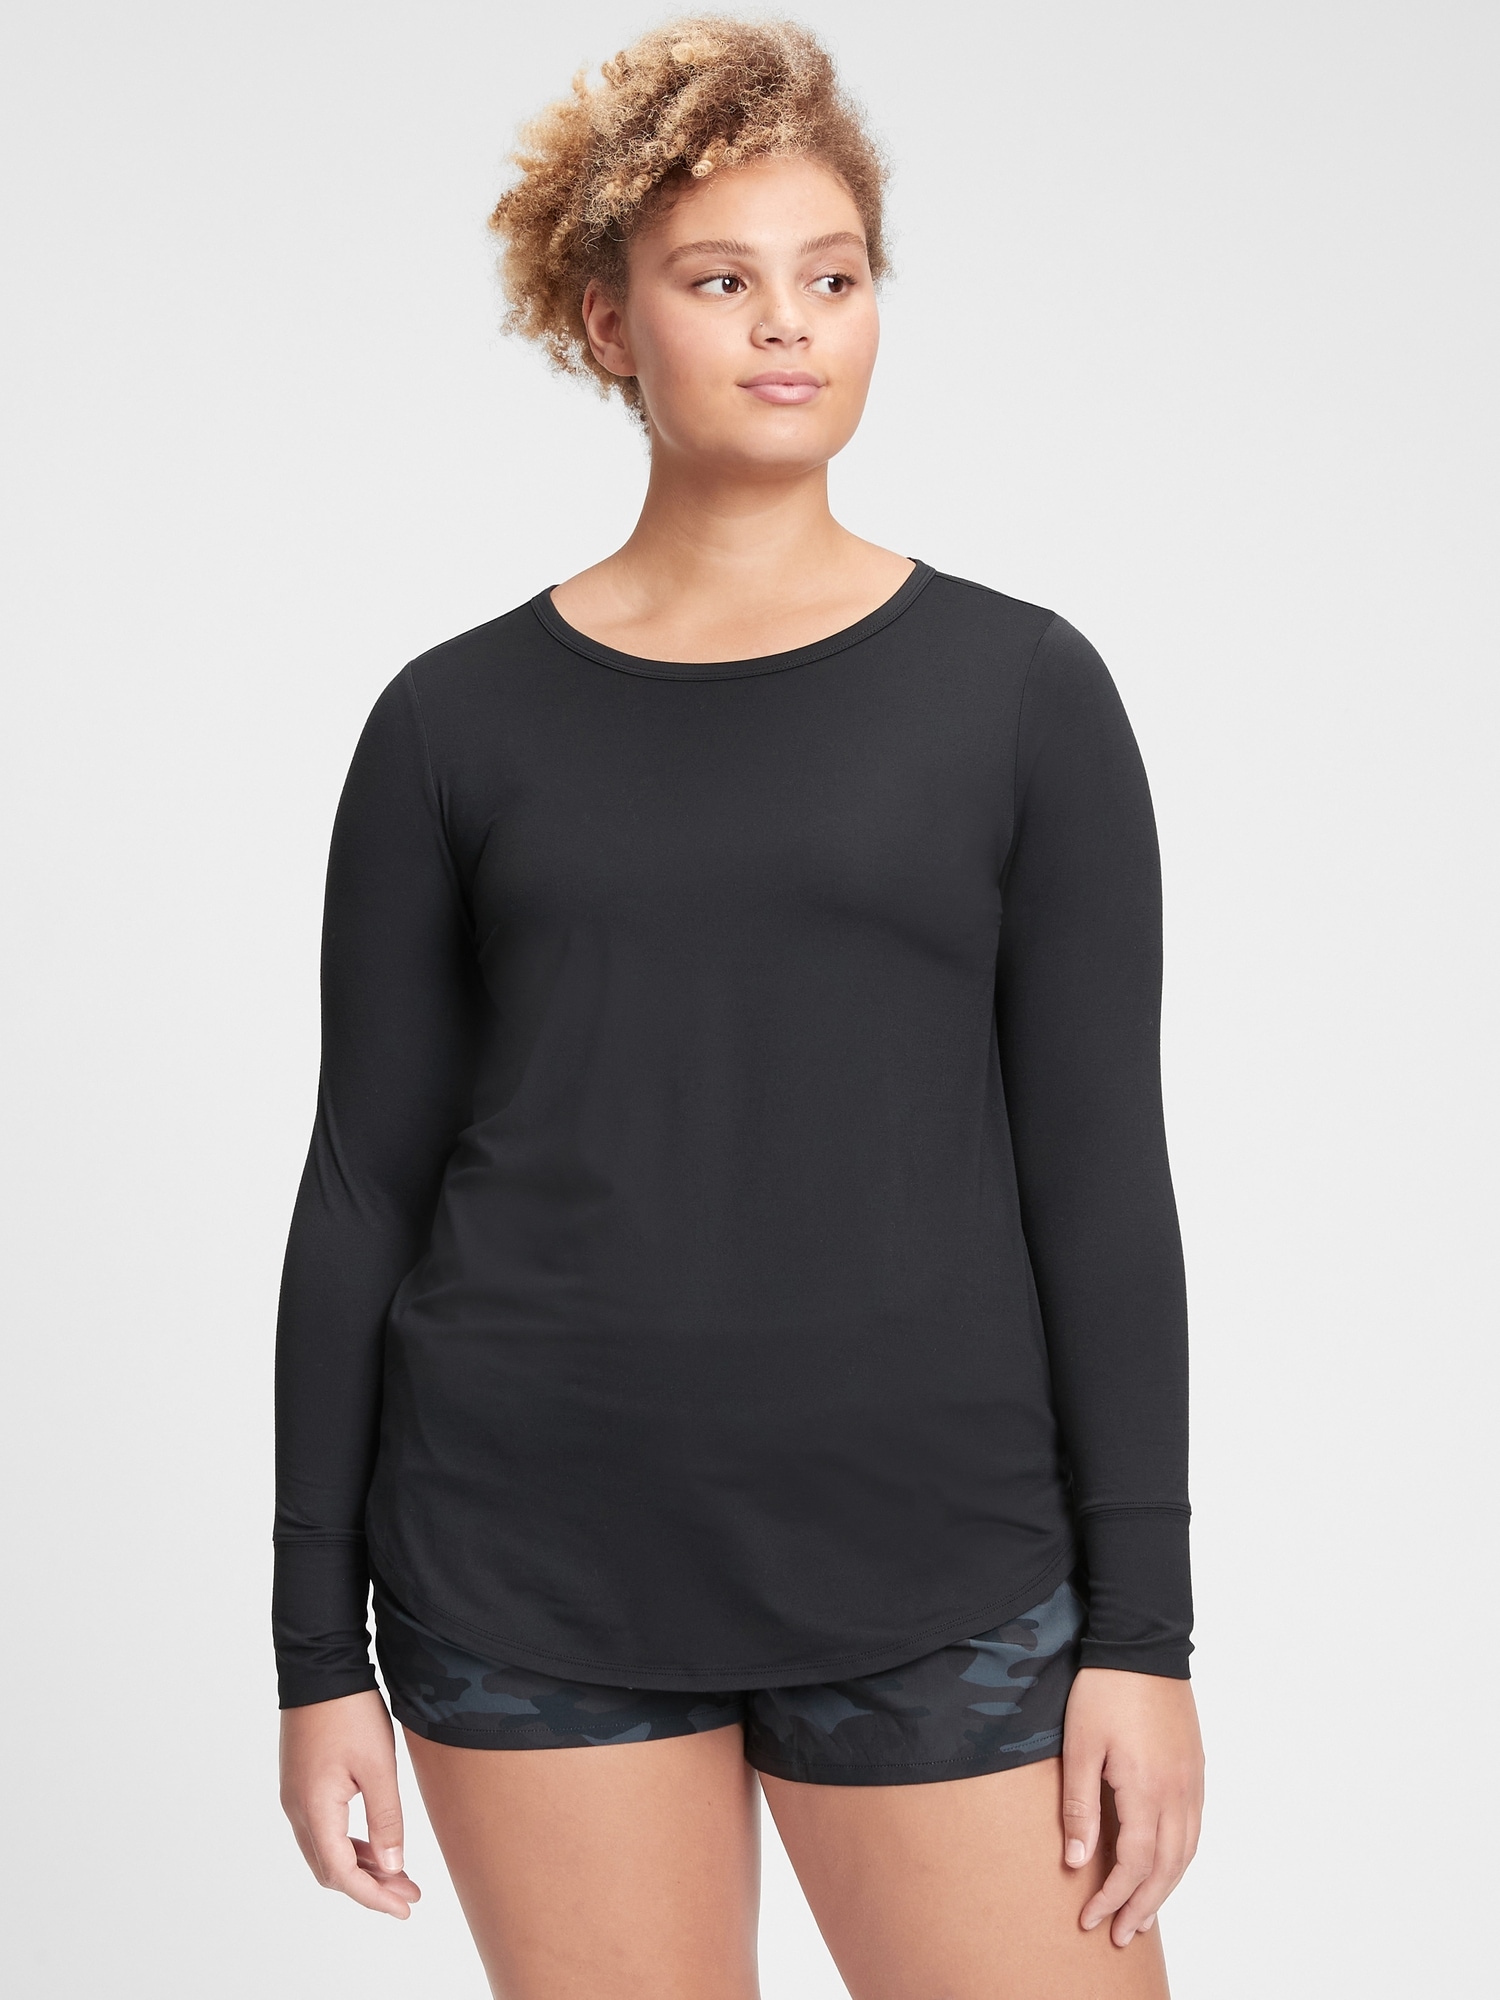 Tops - XL - Women - 741 products